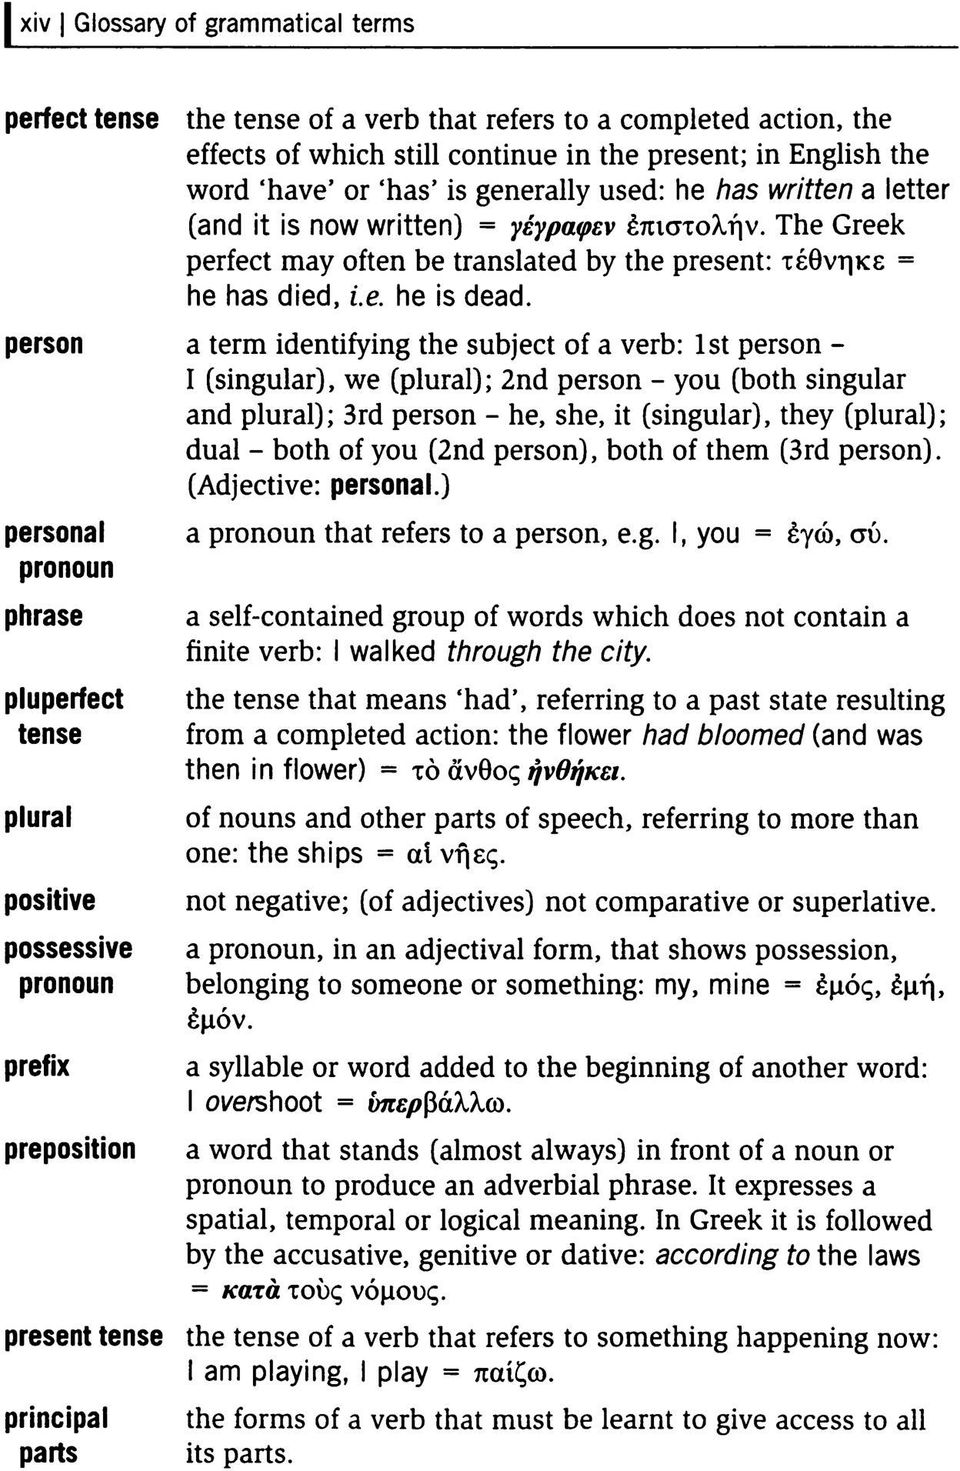 person a term identifying the subject of a verb: 1st person - I (singular), we (plural); 2nd person - you (both singular and plural); 3rd person - he, she, it (singular), they (plural); dual - both